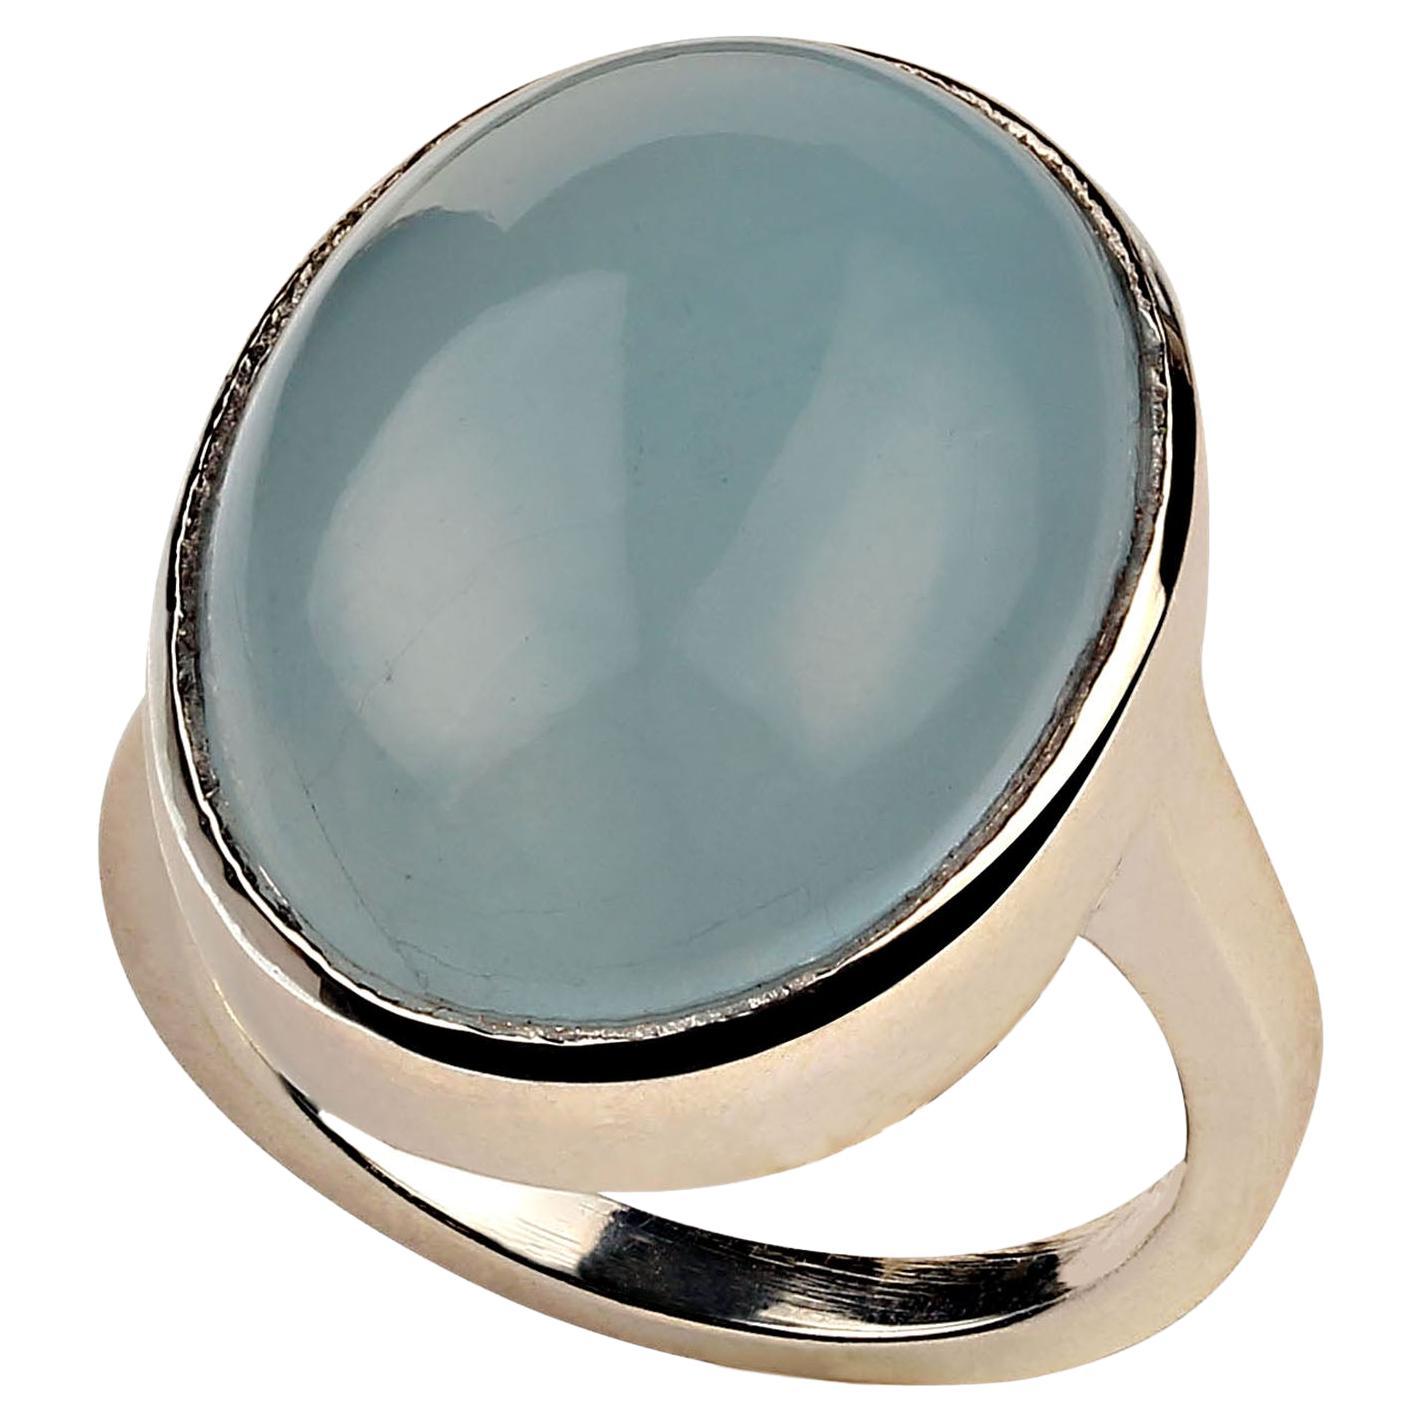 24ct astonishing Aquamarine oval cabochon bezel set in Sterling Silver ring. Gorgeous, large, 22x17MM,  translucent aquamarine set in just the right amount of sterling silver to accent the beauty of this gemstone. Aquamarine is in the Beryl family.